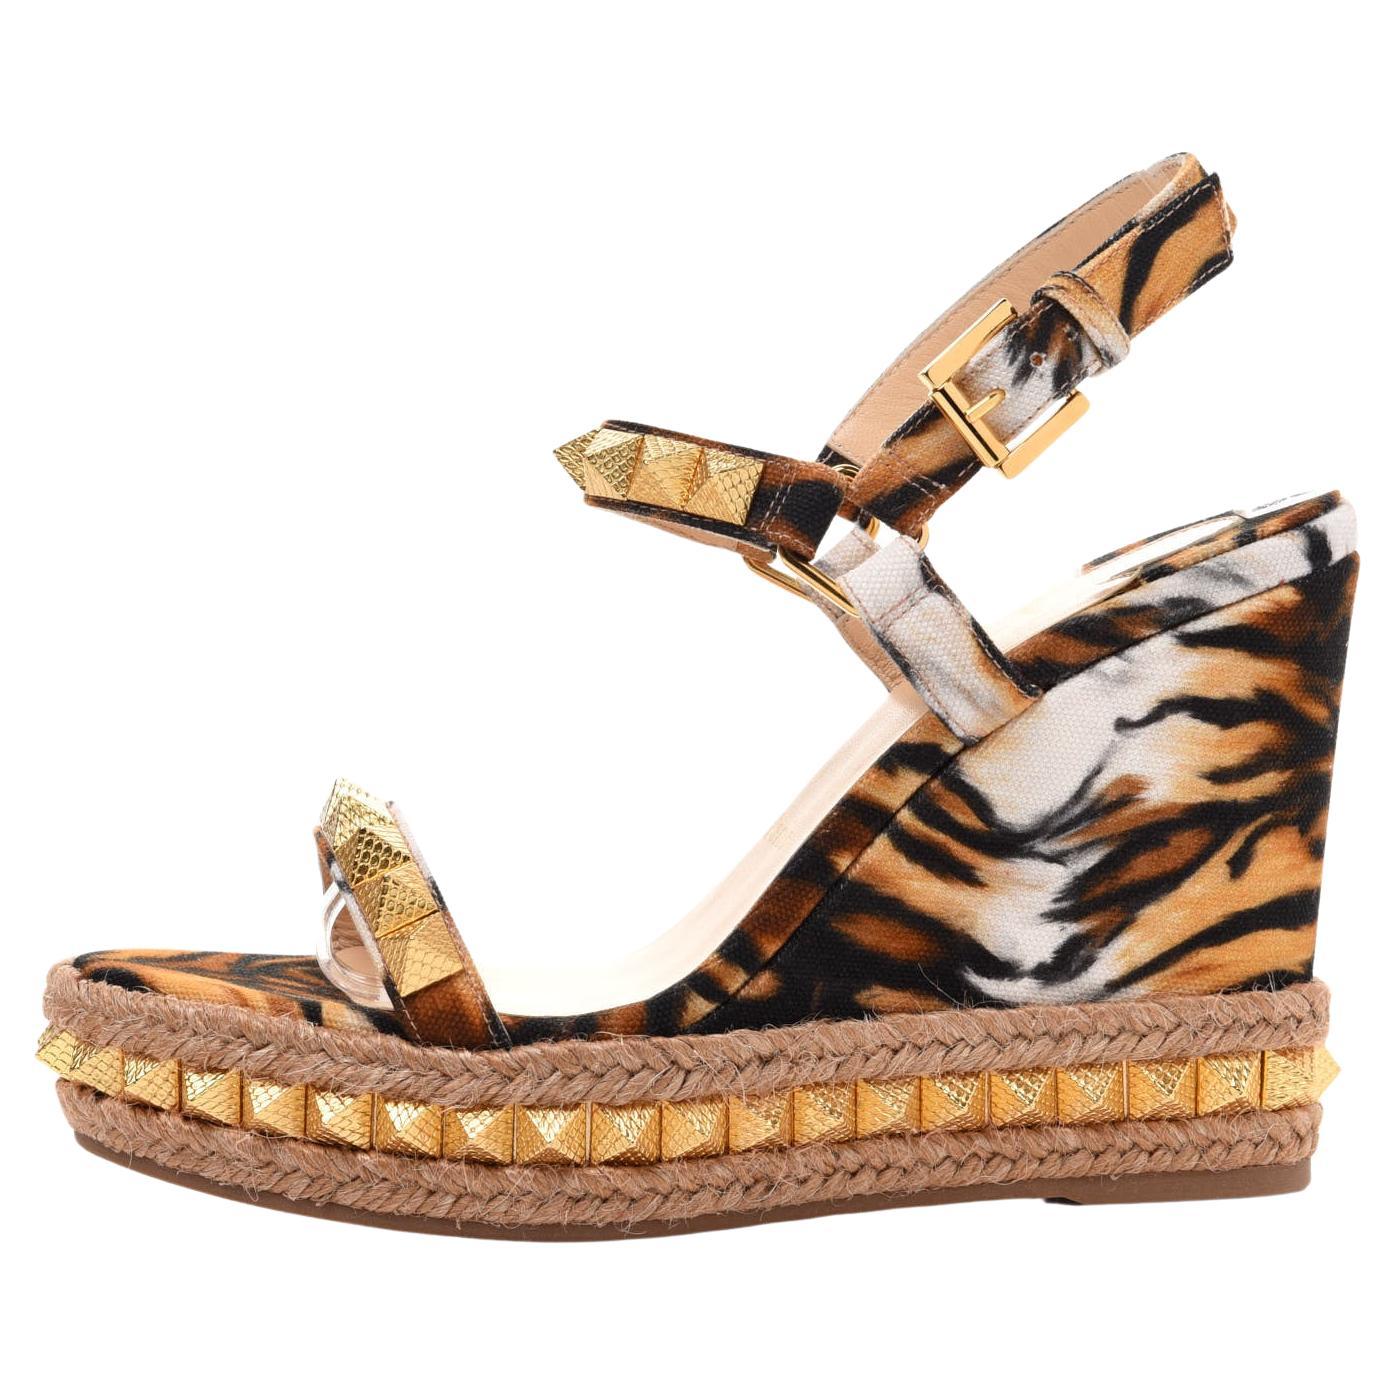 Dotted with signature spiked embellishment and braided raffia trim, these platform wedges are finished with a dramatic tiger stripe design. Cotton upper. Open toe. Adjustable ankle strap. Wedge heel 110mm. Brand new, never worn. Comes in all the